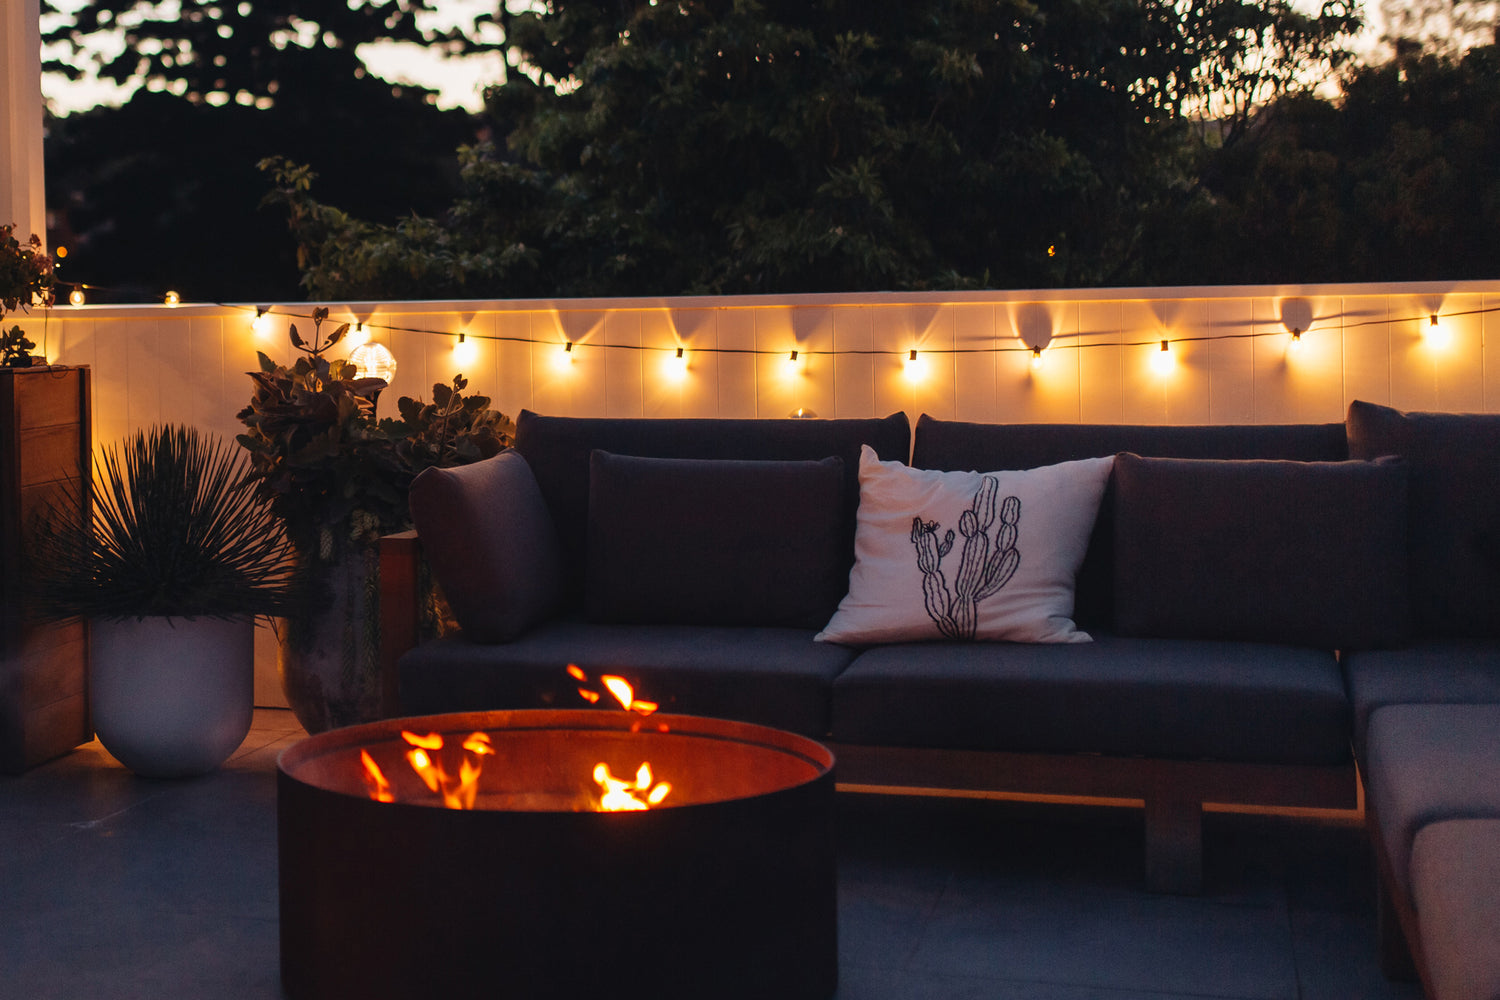 Warm white solar festoon lights hanging on balcony wall by outdoor lounge area